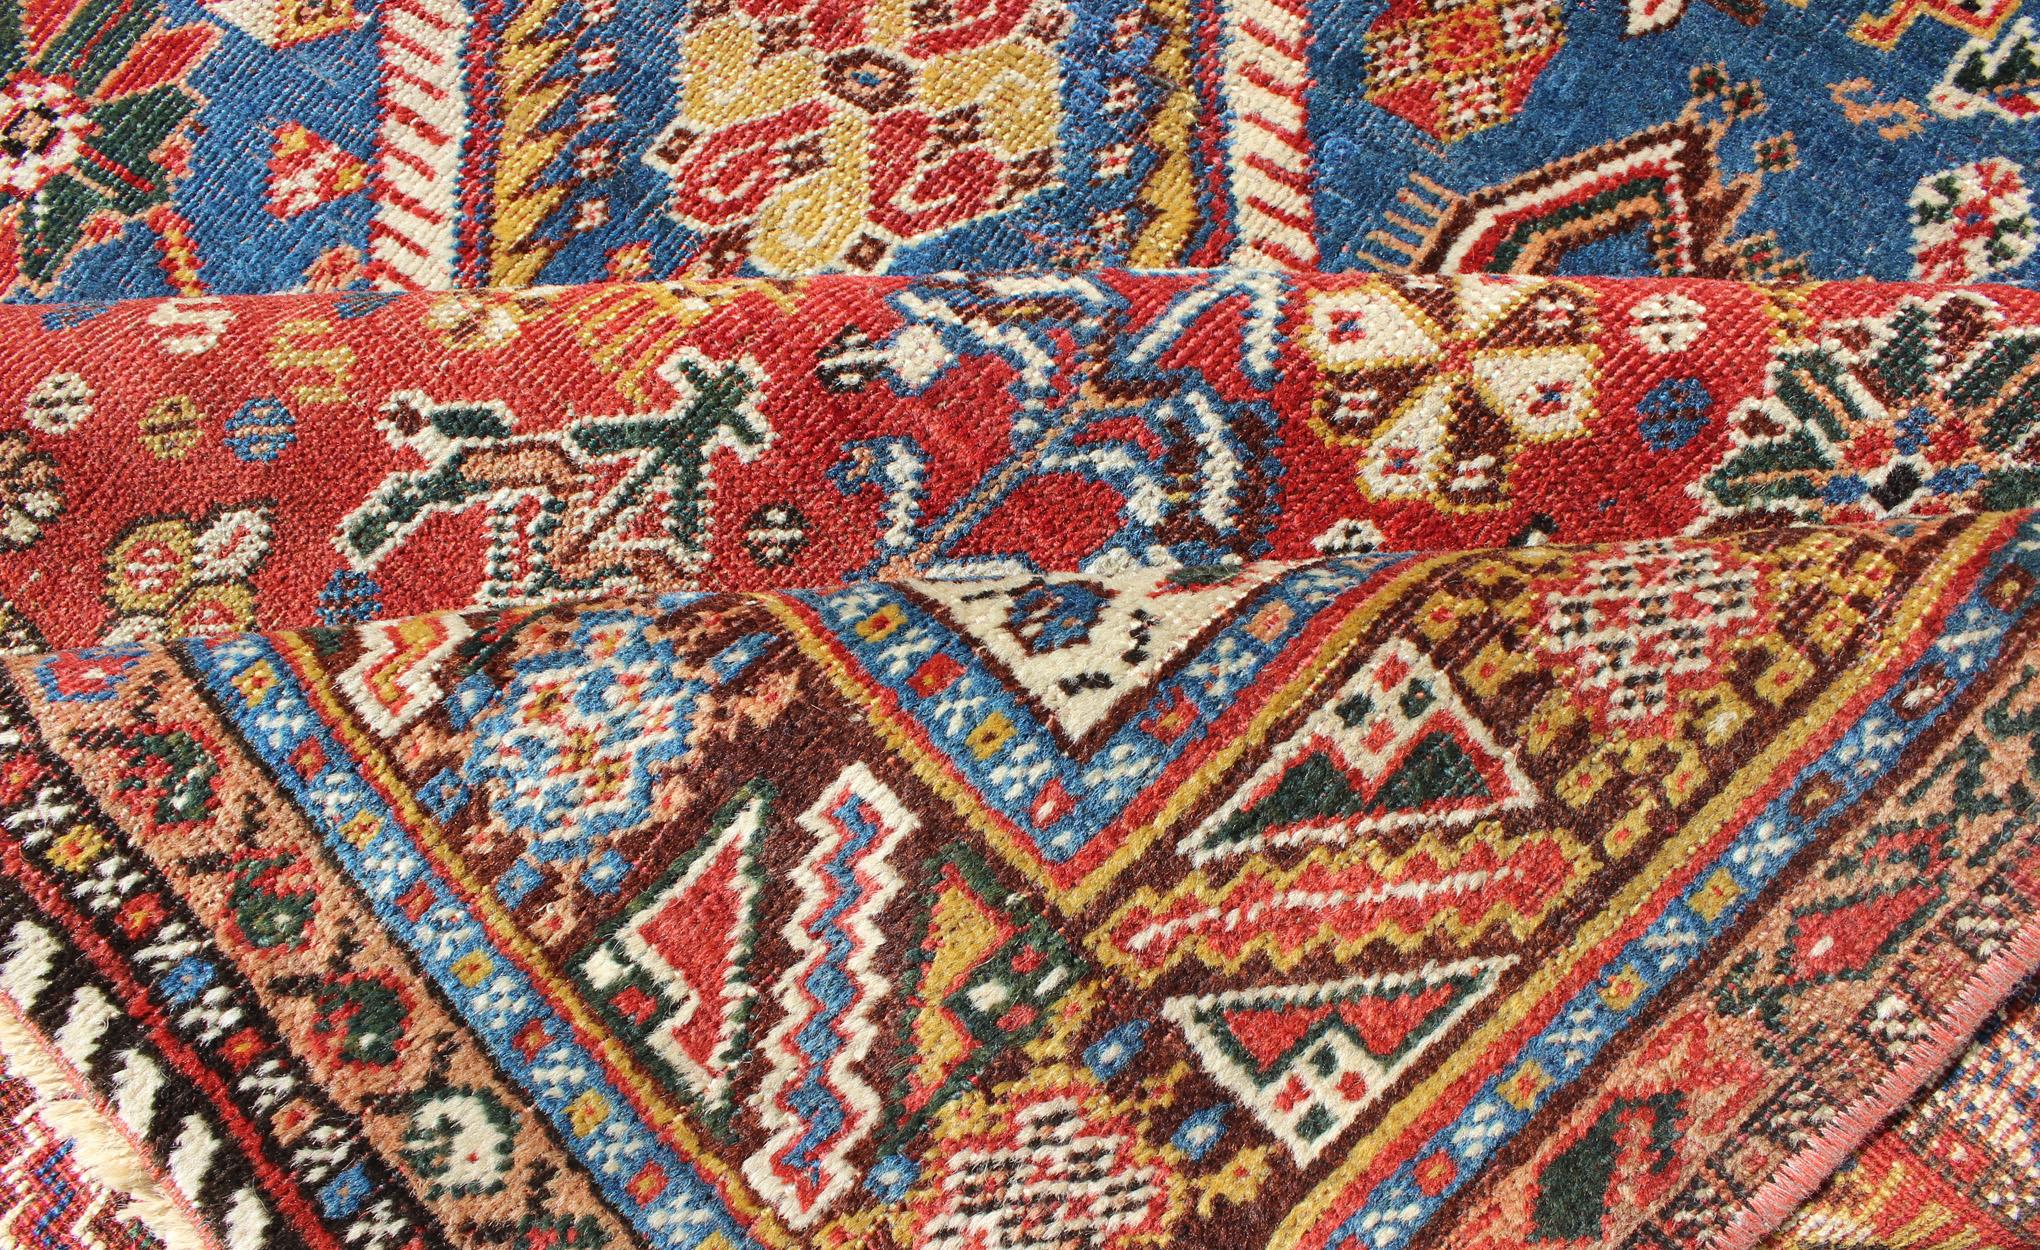 Hand-Knotted Antique Persian Qashqai Rug with Medallion Design in Rich Colors, Blue and Red